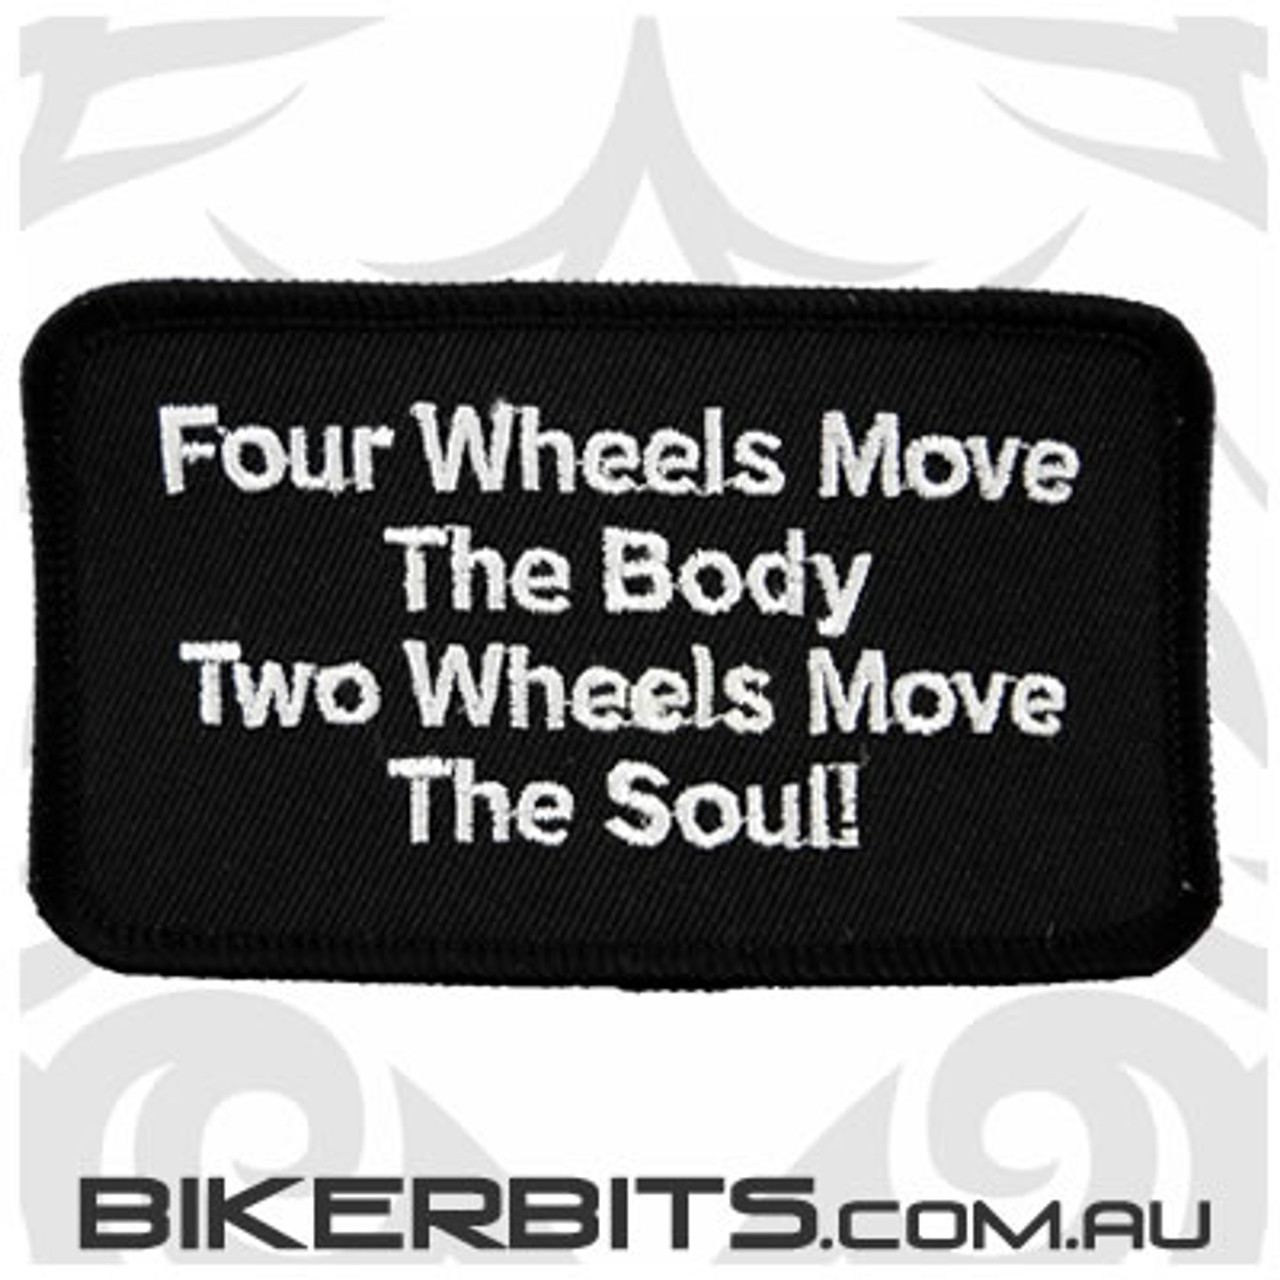 Four Wheels Moves The Body Patch